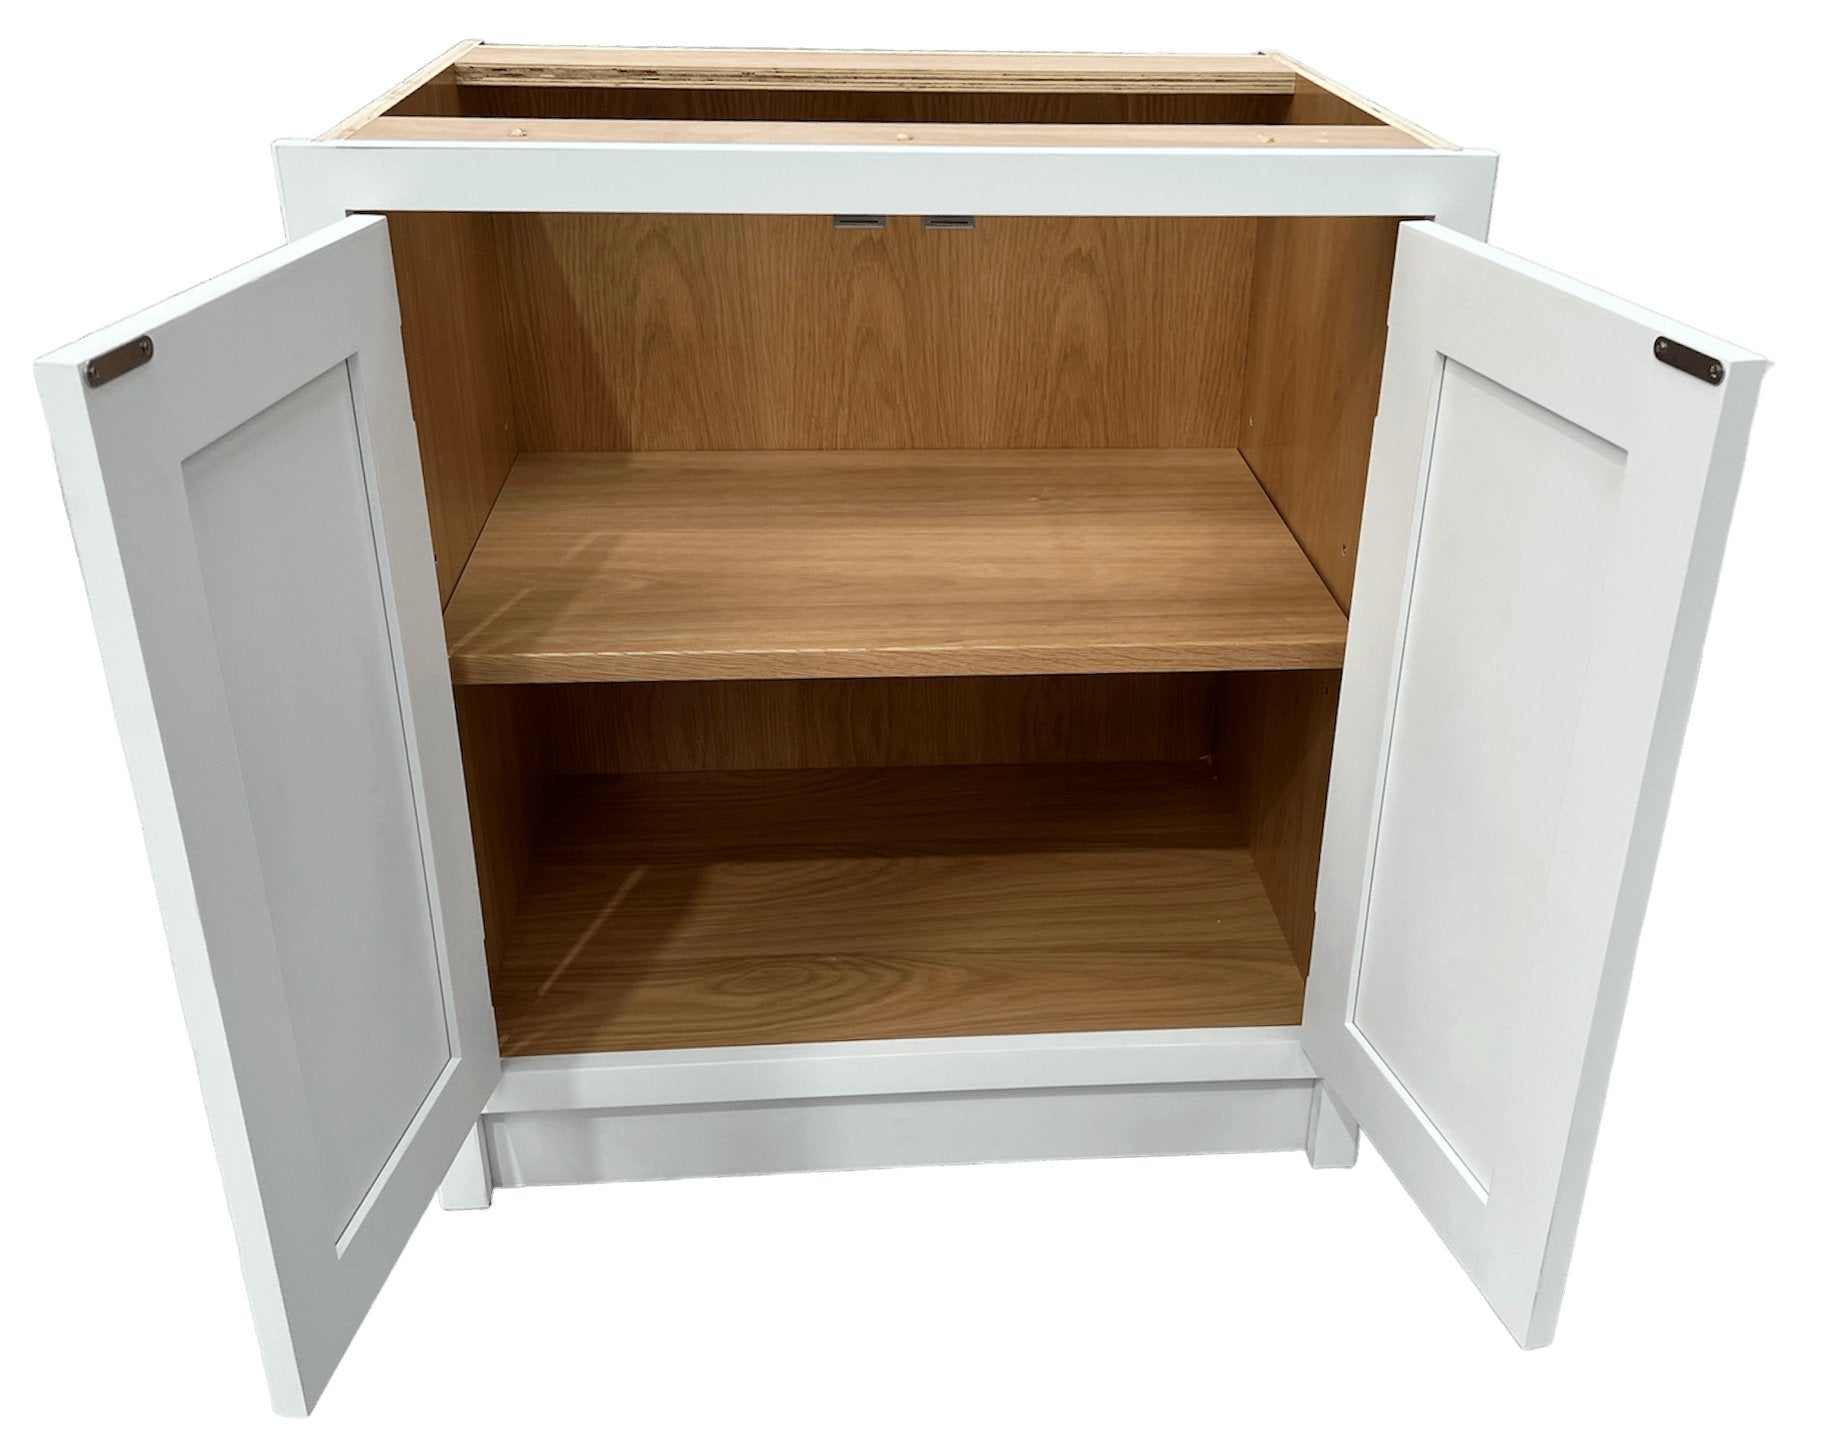 BH 700 - 700mm Highline double door base unit - Classic Kitchens Direct